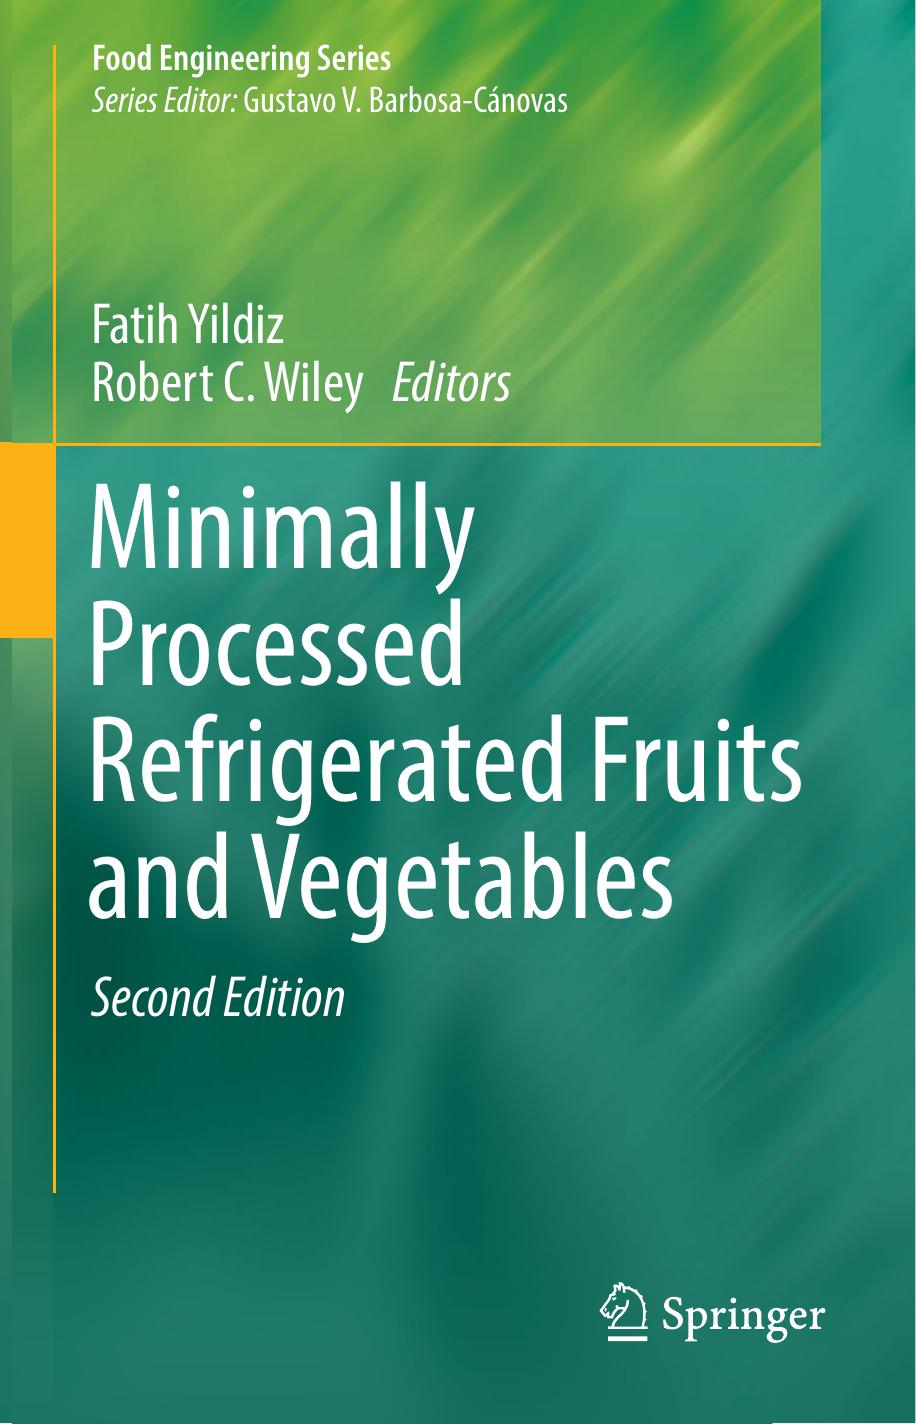 Minimally Processed Refrigerated Fruits and Vegetables-Springer US (2017)